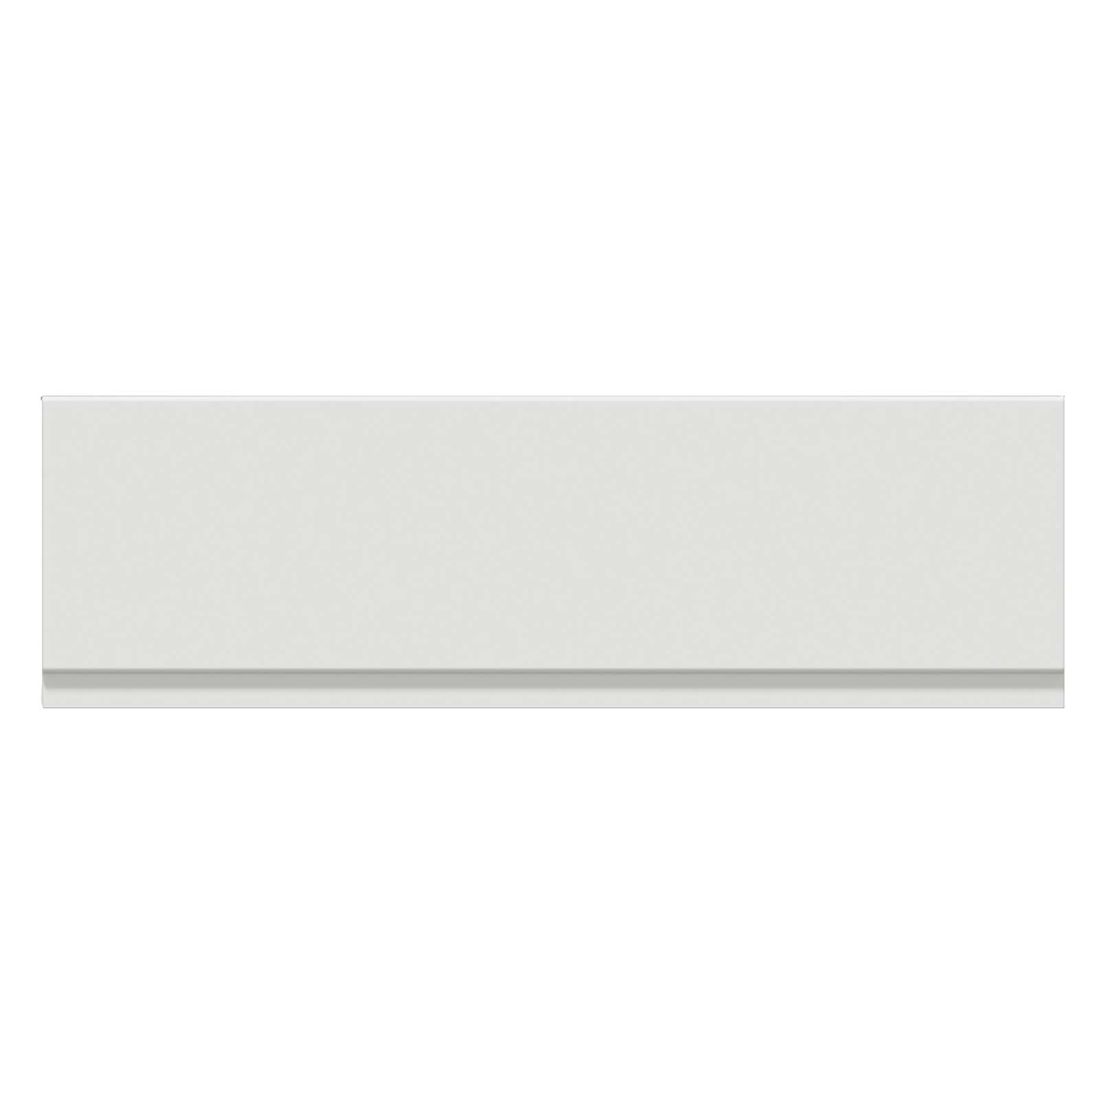 Reinforced Acrylic Bath Panel Front White 1700 X 520Mm